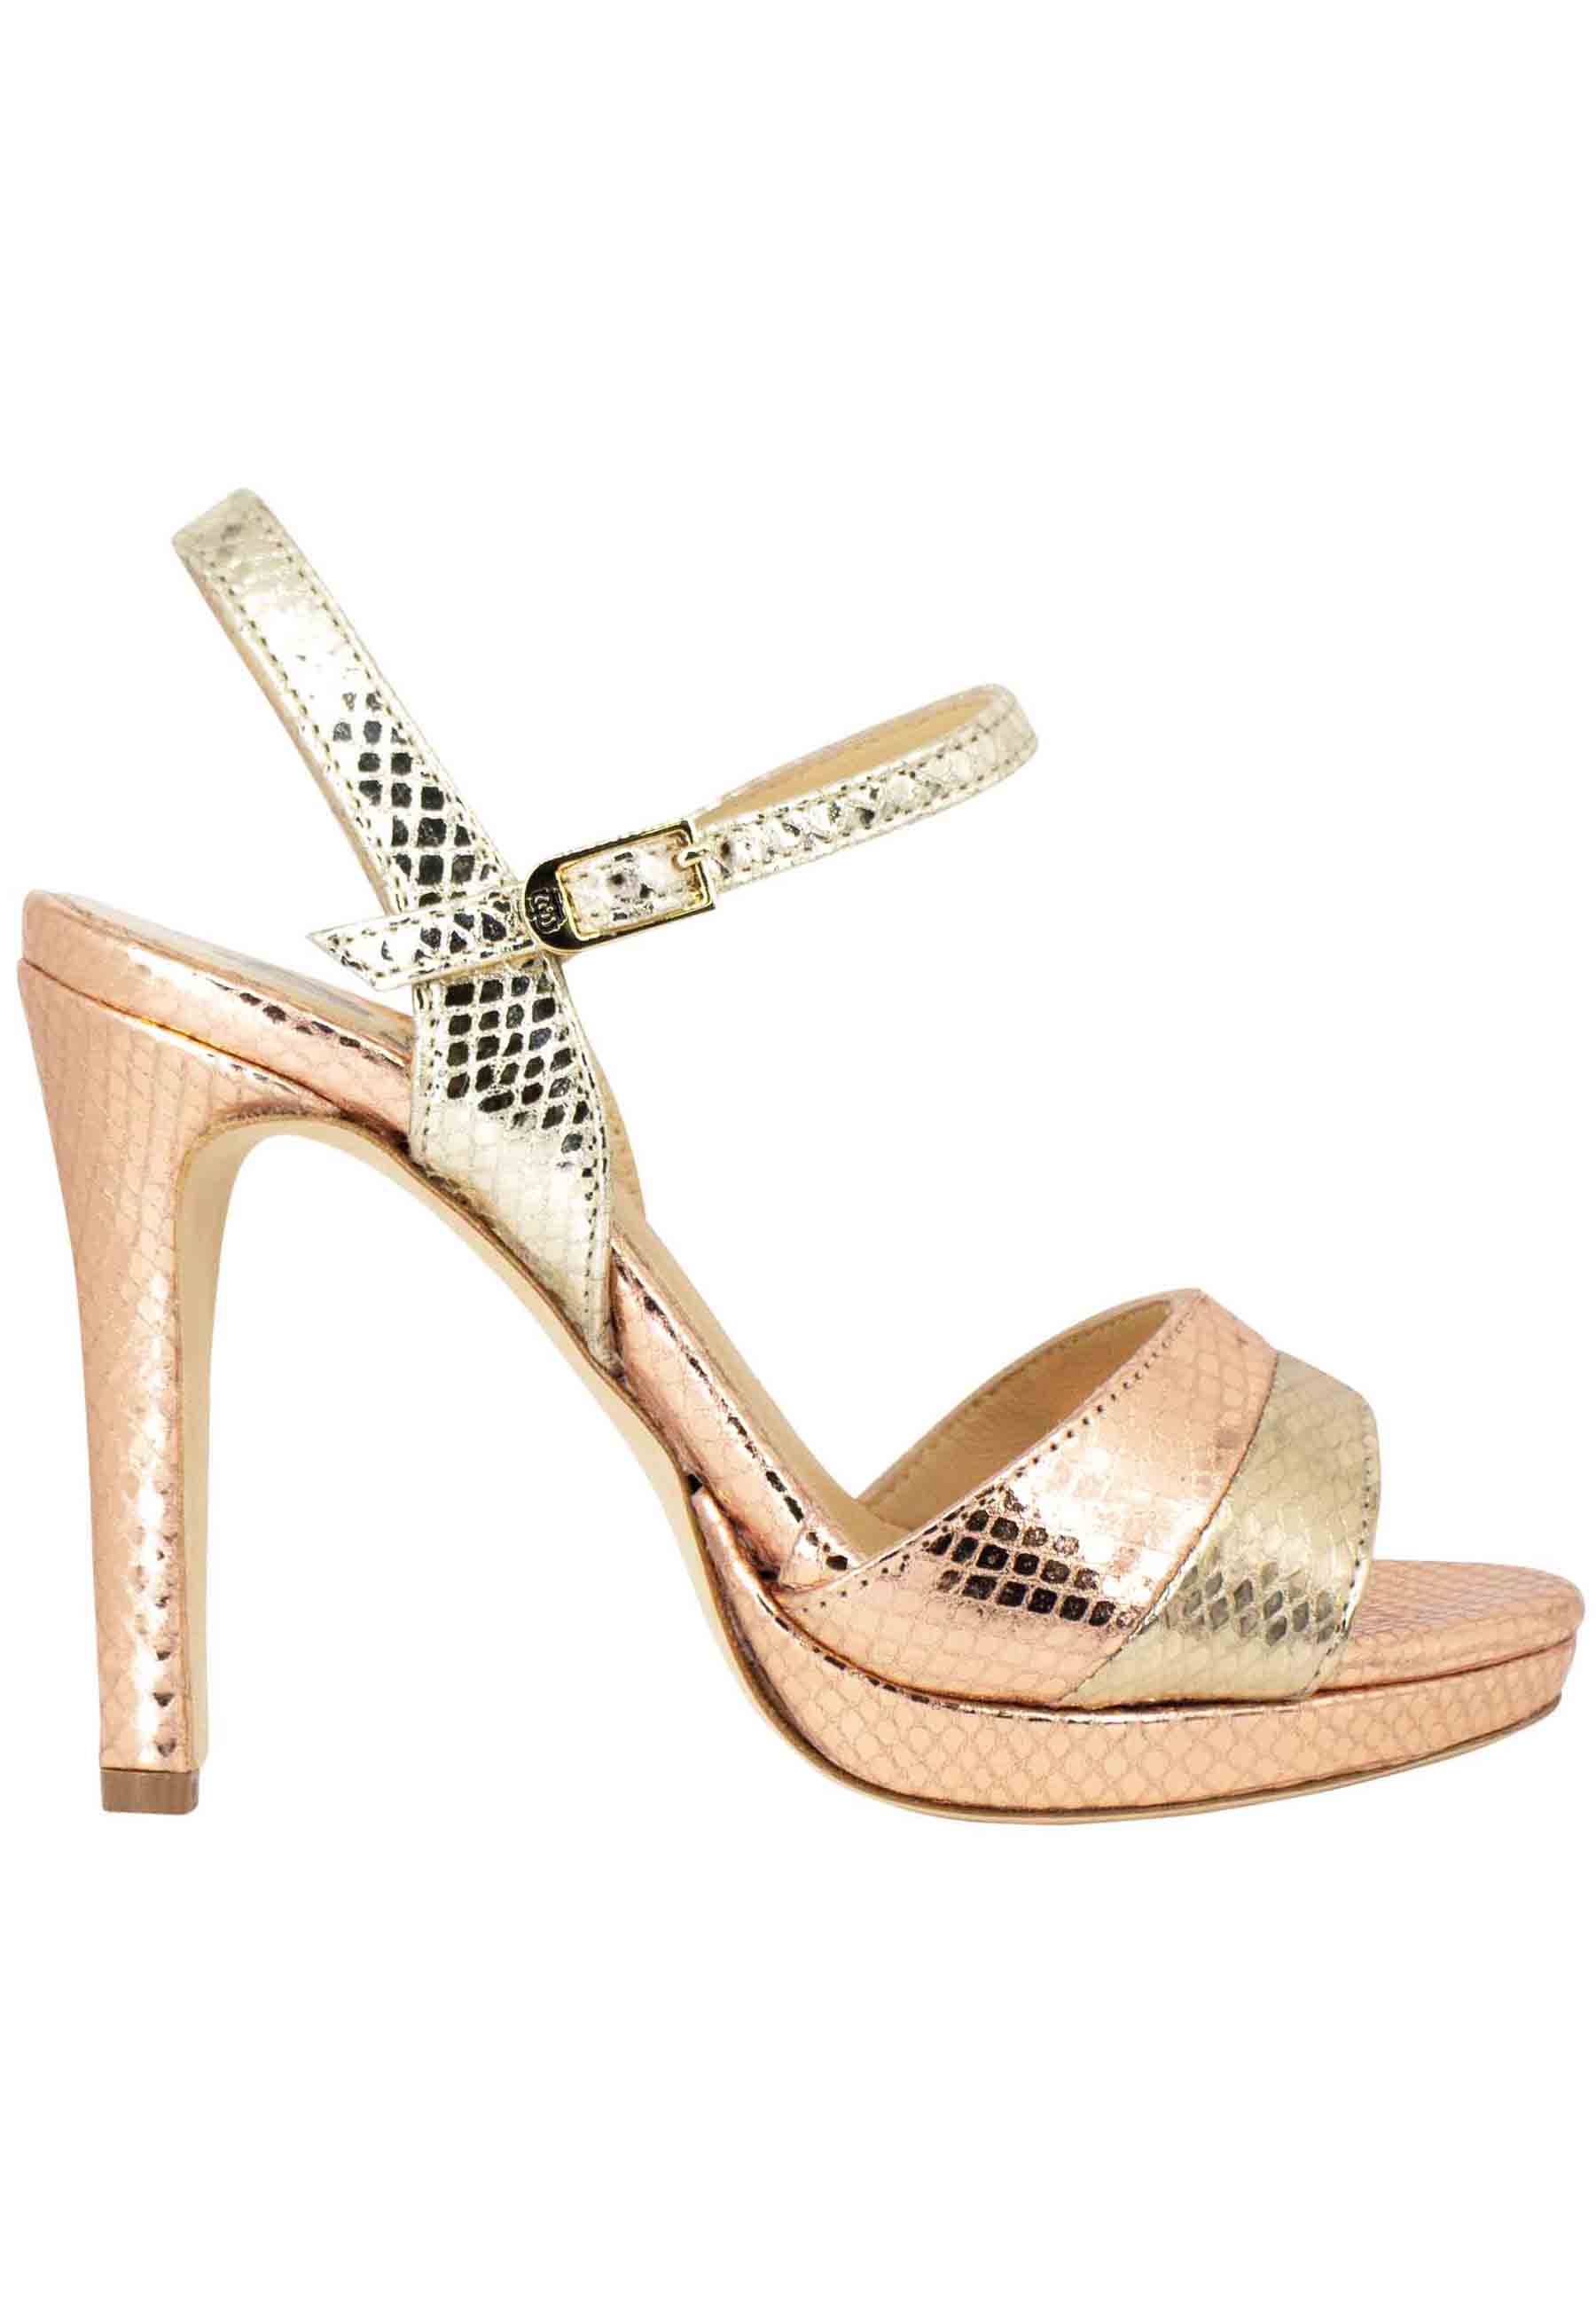 Women's sandals in powder pink laminated leather with ankle strap, high heel and plateau